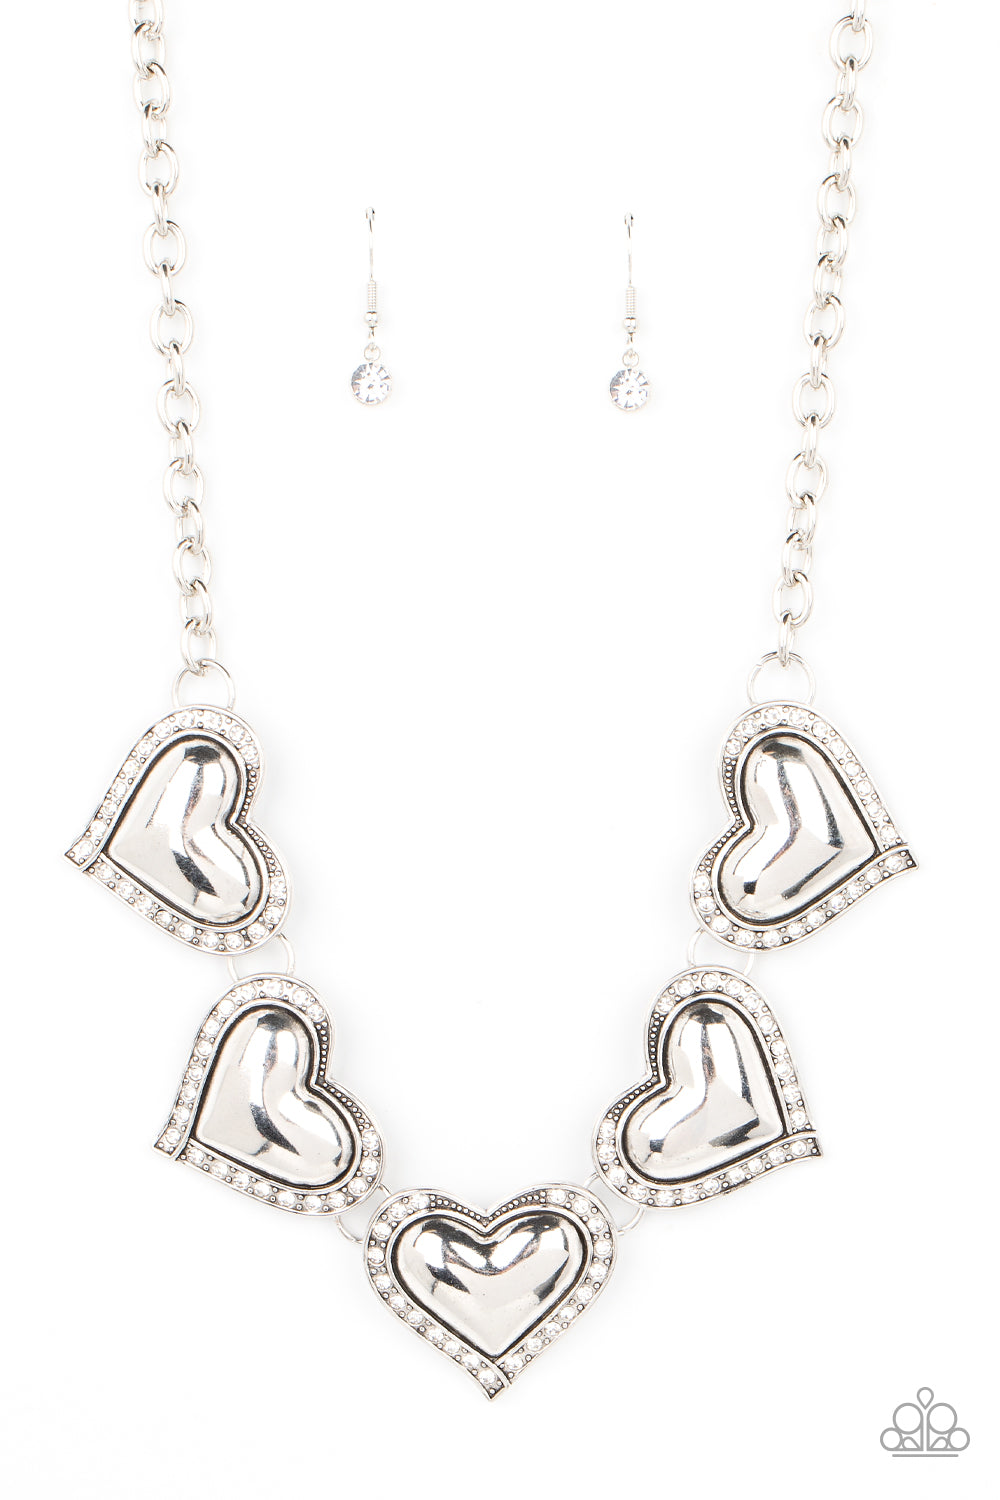 Kindred Hearts White Necklace